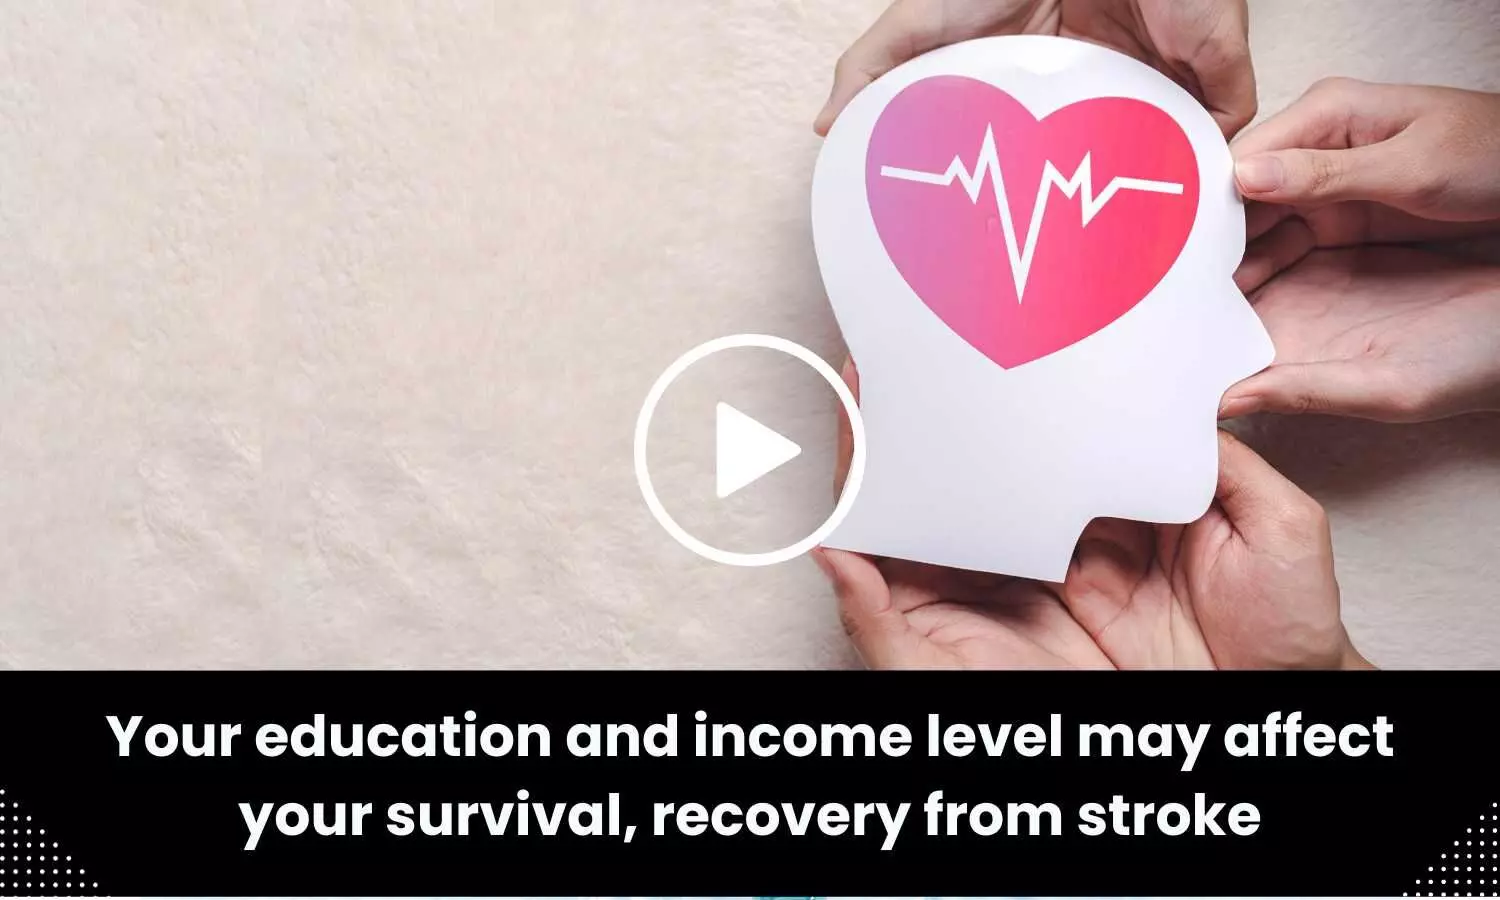 Your education and income level may affect your survival, recovery from stroke